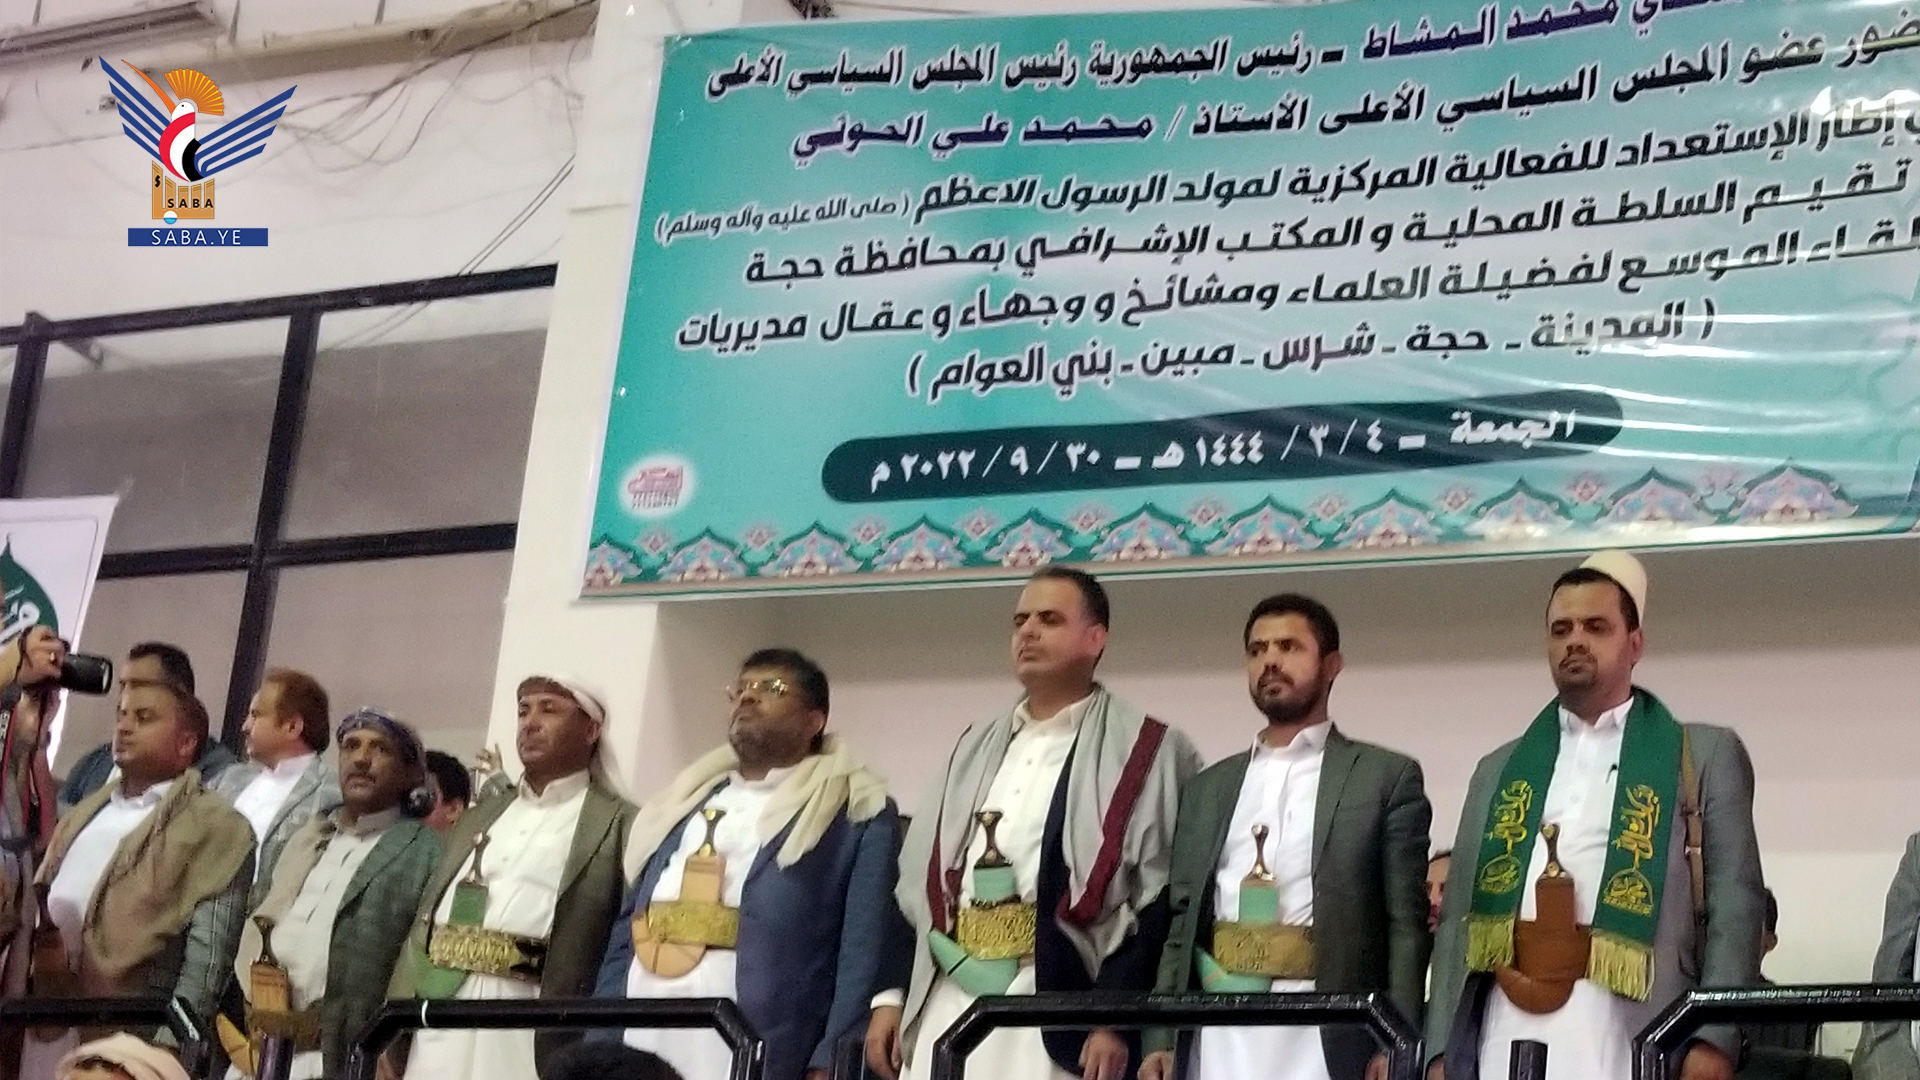 Al-Houthi: Enemies abuses of Prophet will only increase Yemenis' adherence, to follow in his Sunnah 